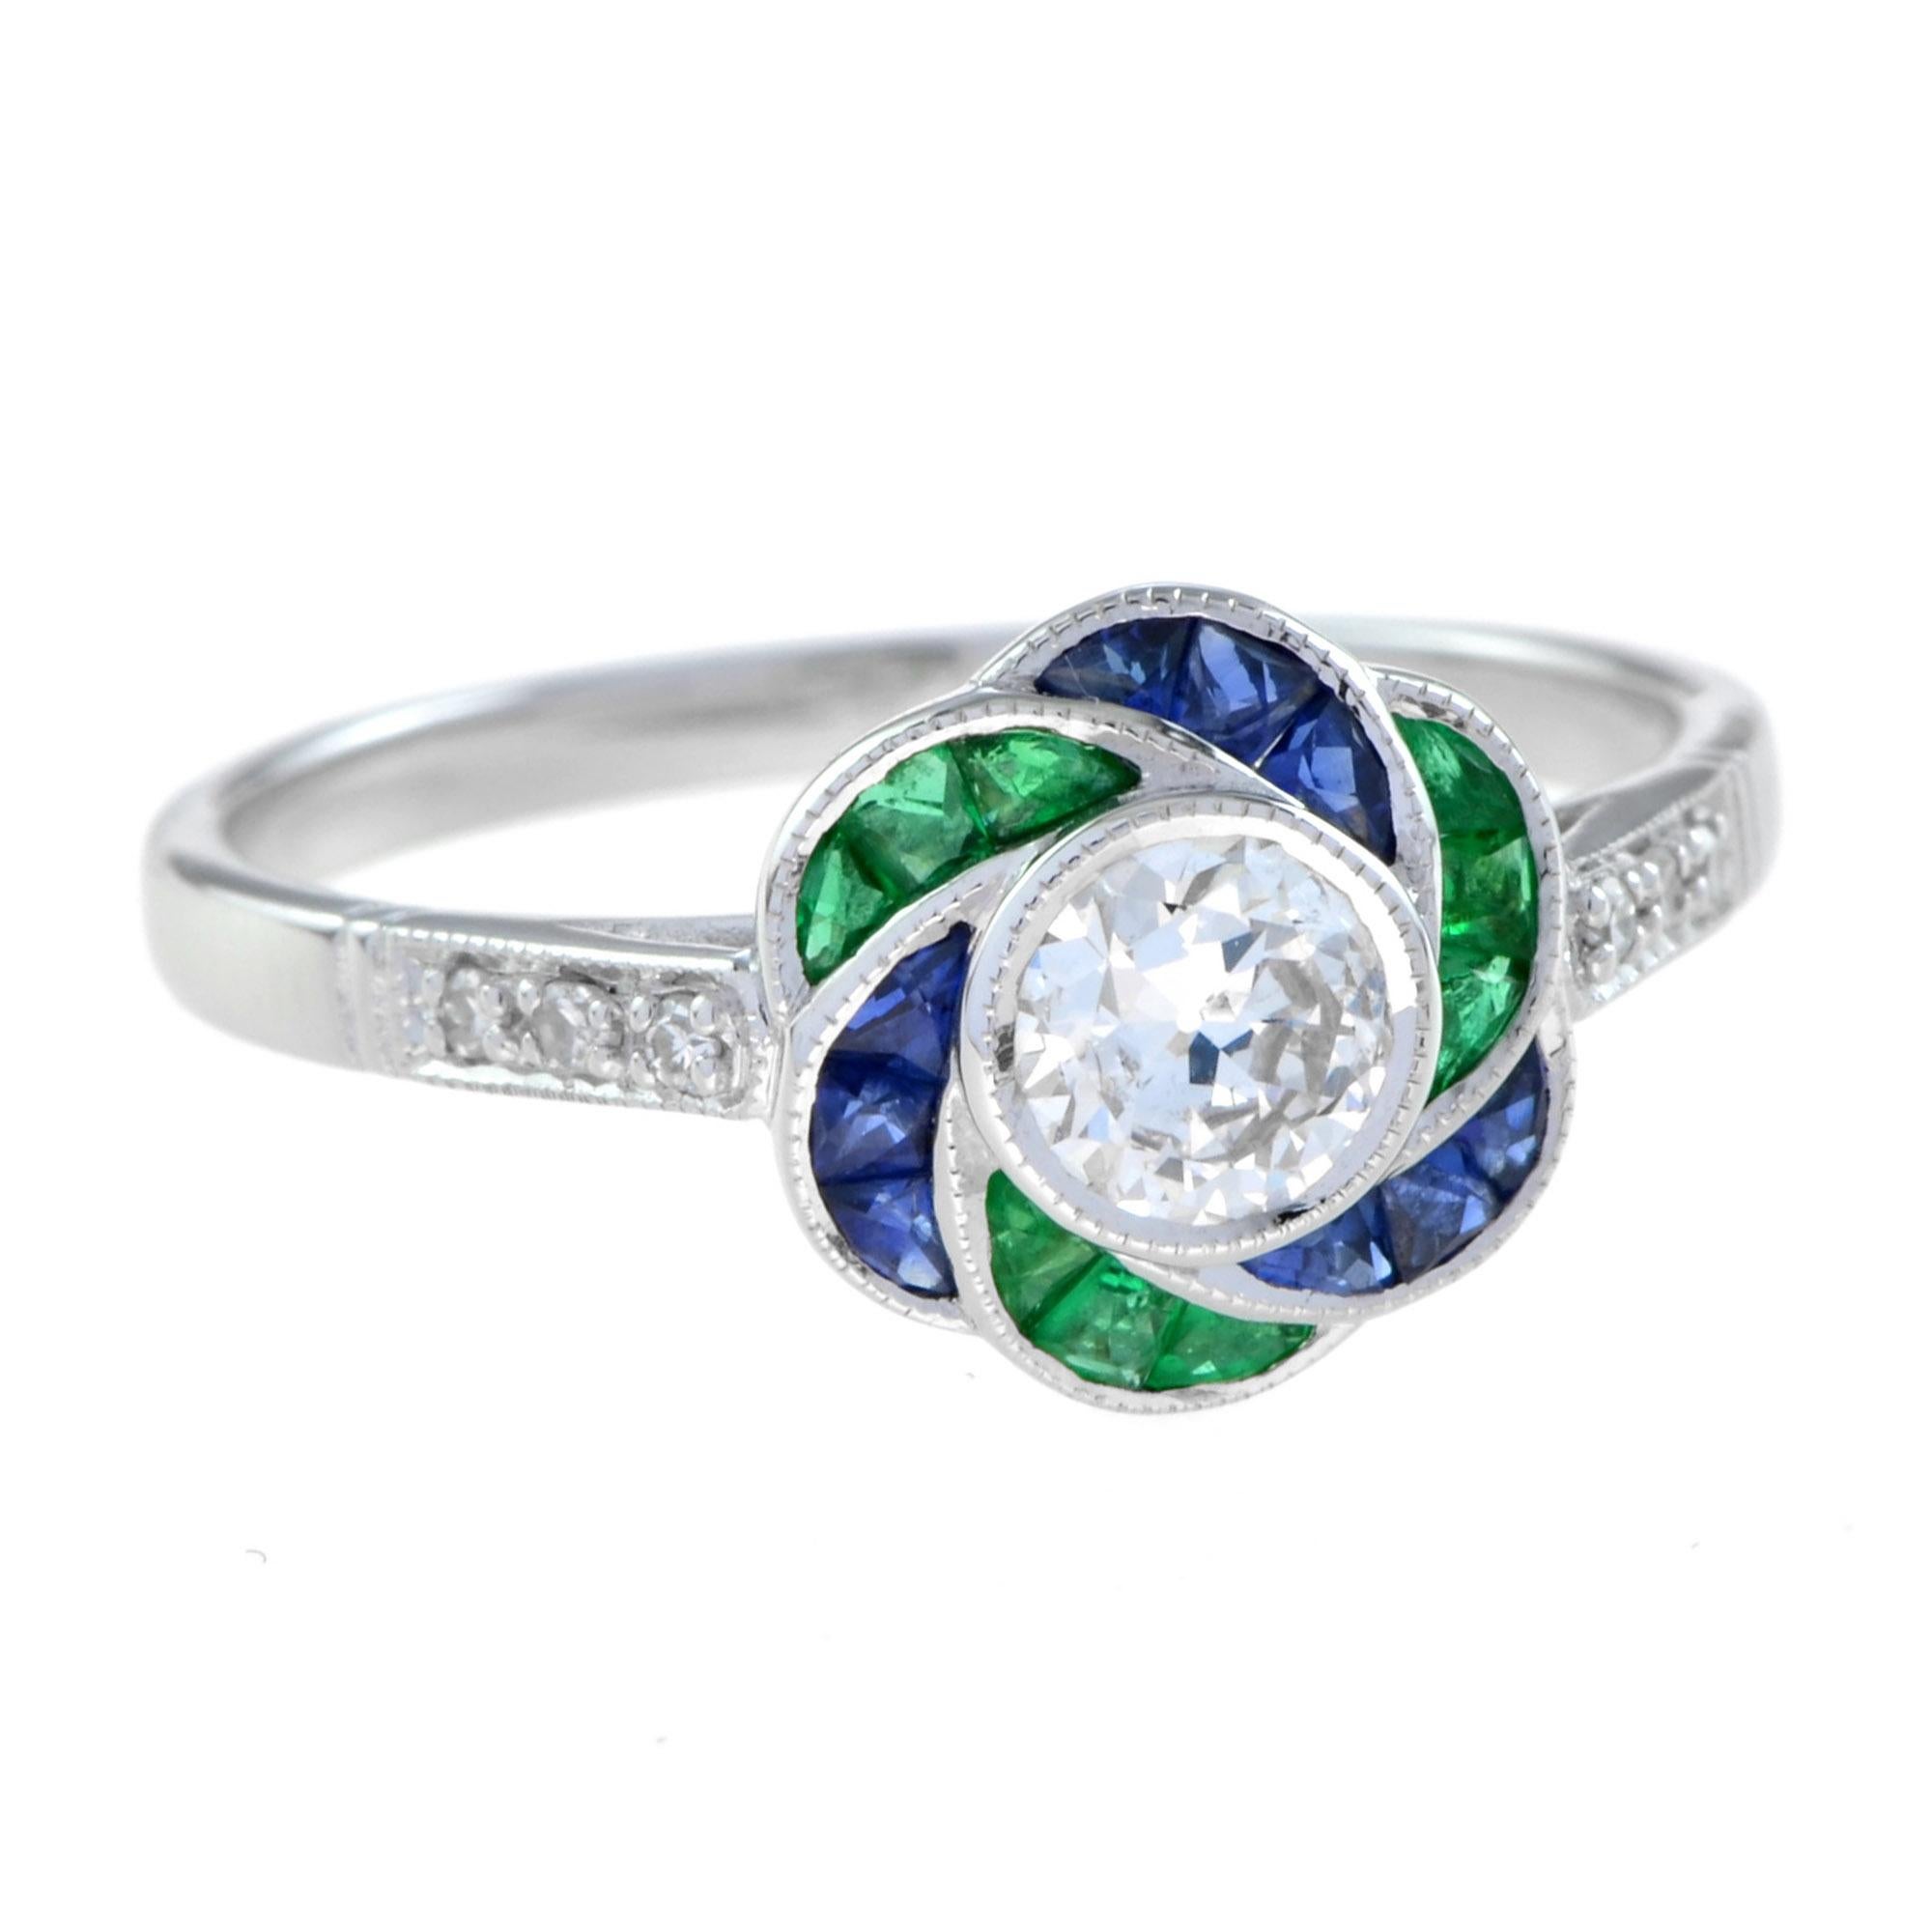 Artistry and sophistication come together in a flower ring with diamond, emerald, and sapphire from the Art Deco era. The ring features a round shape center diamond in a bezel setting surrounded by French cut blue sapphire and emerald for its